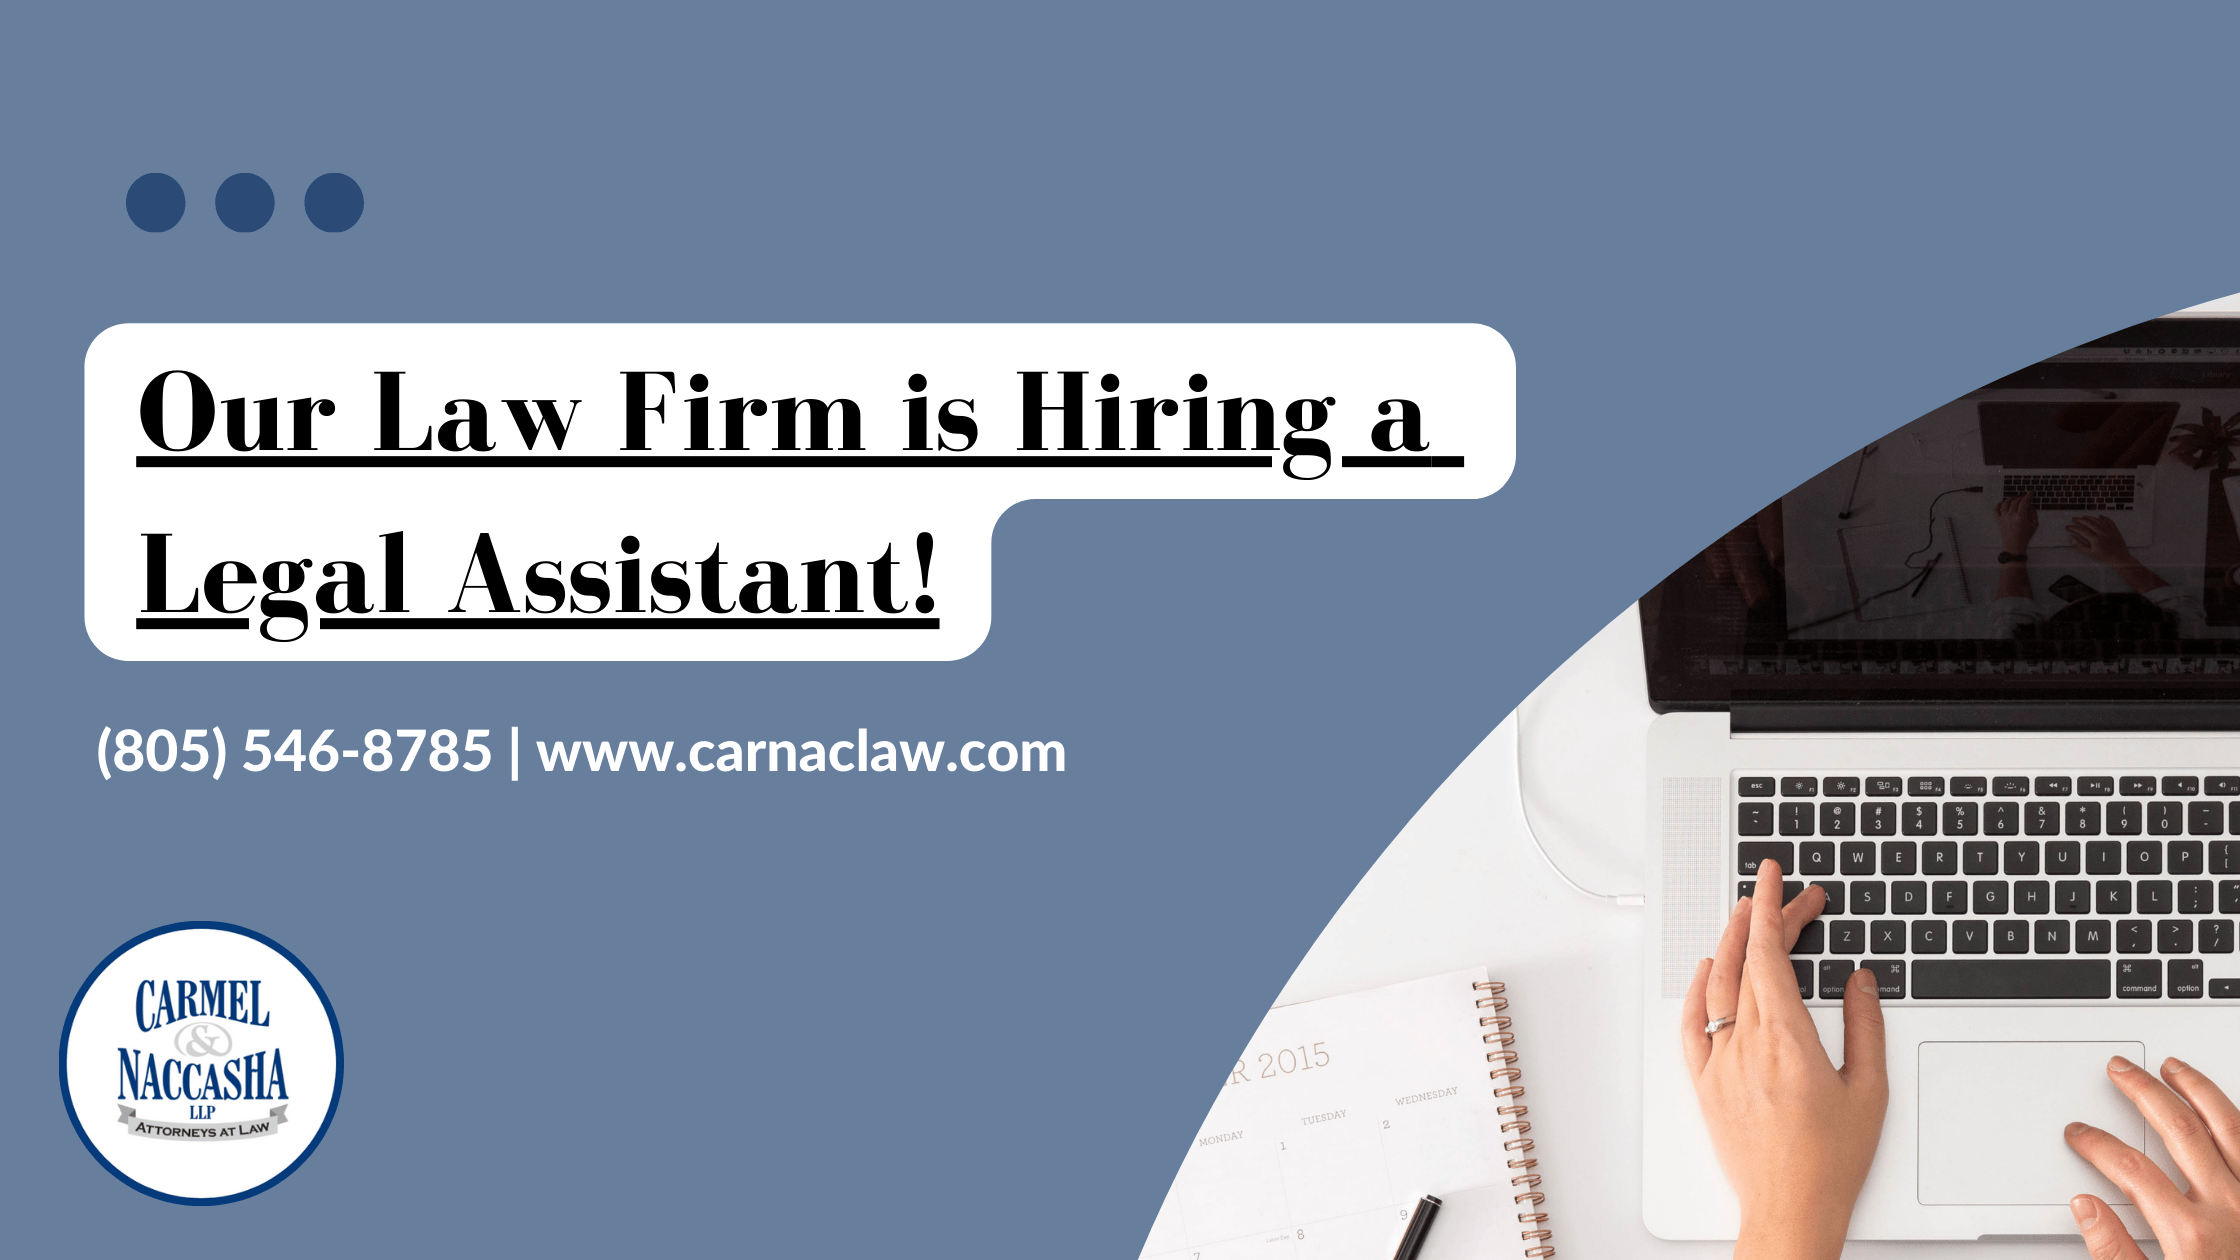 We're hiring a Legal Assistant to join our team.